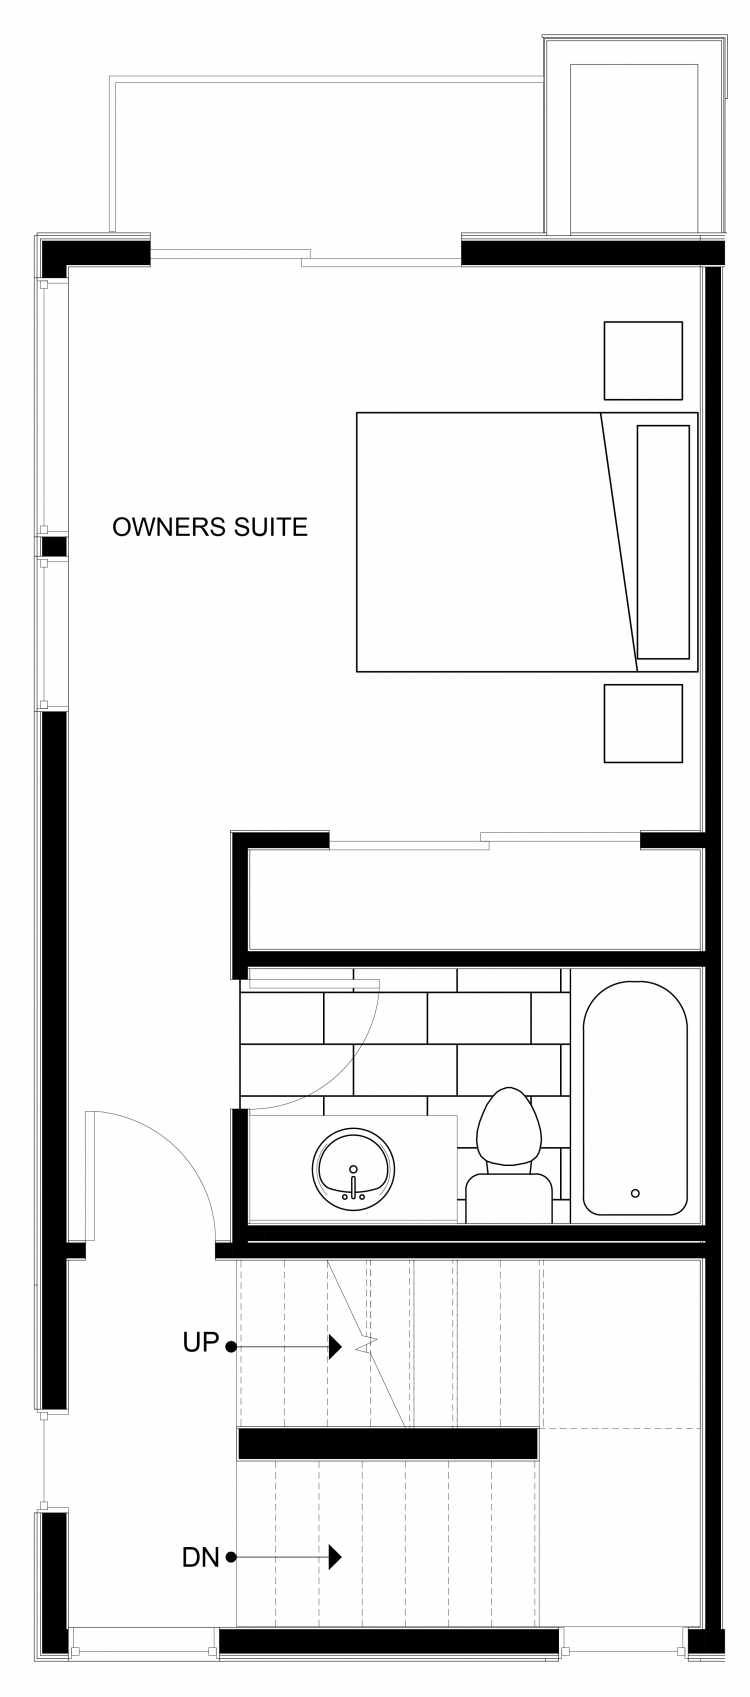 Fourth Floor Plan of 1543 Grandview Pl E, One of the Larrabee Townhomes in Capitol Hill